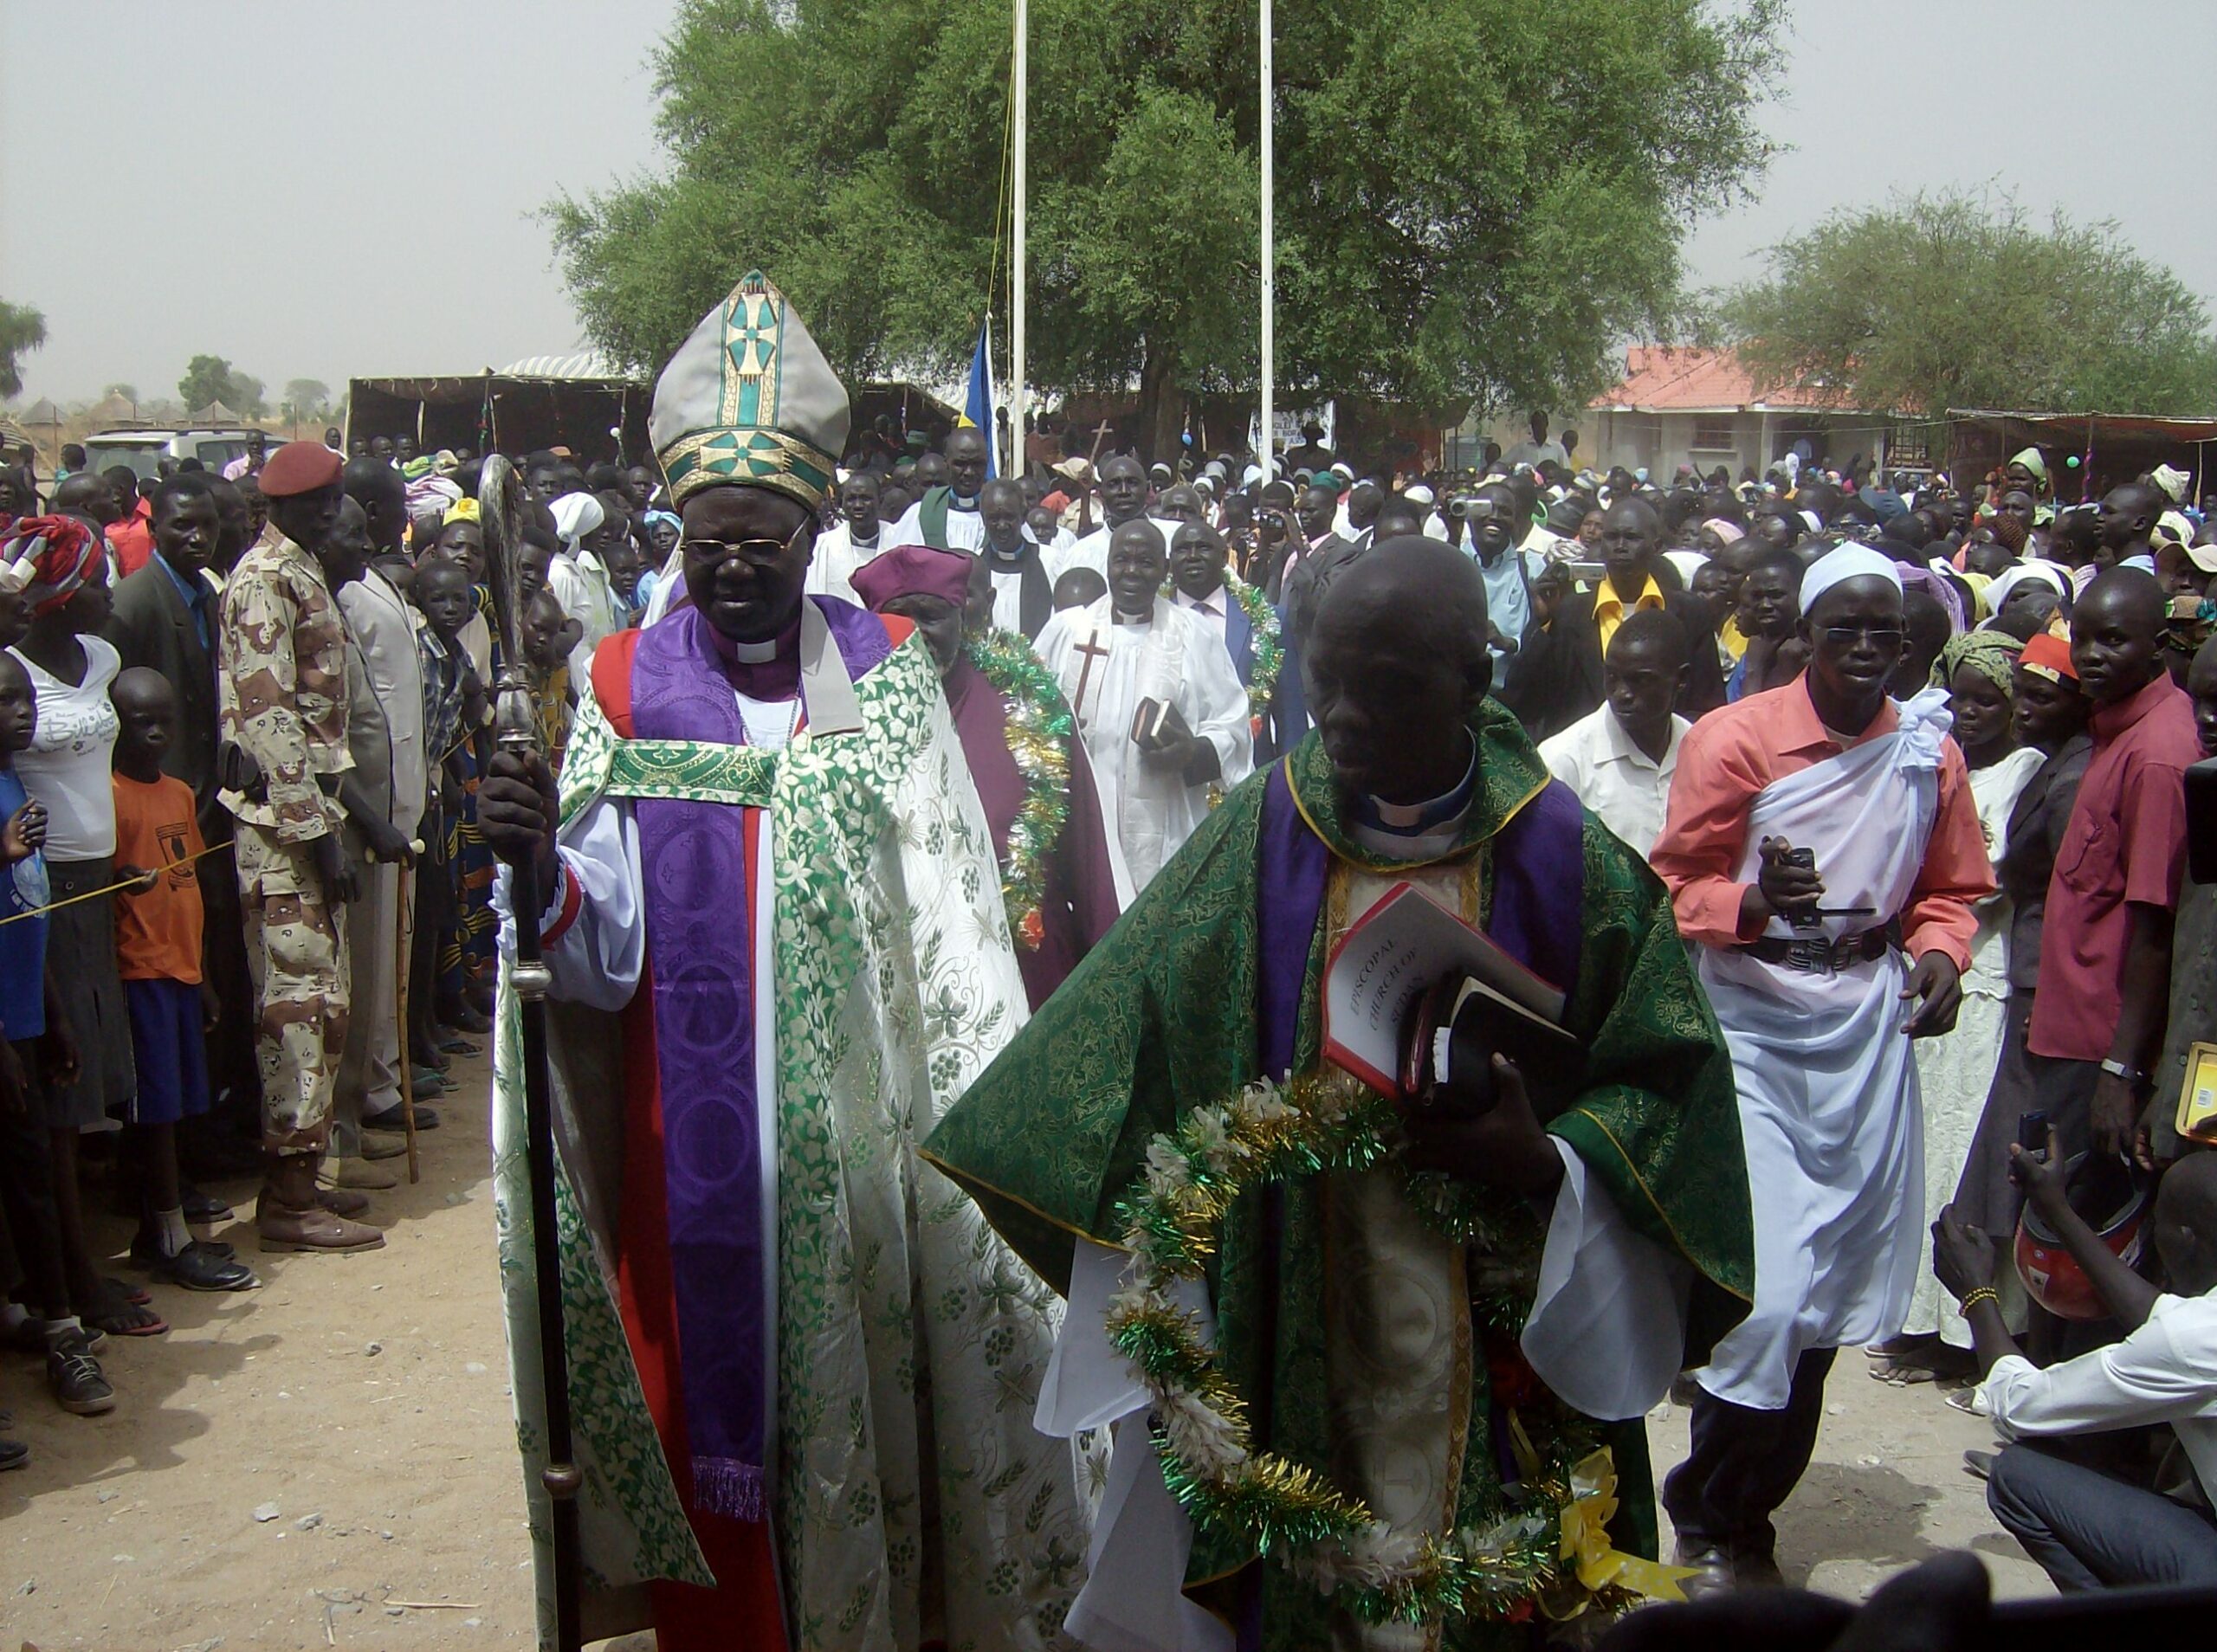 Bor Diocese Bishop, Ruben Akurdit Ngong, leading Christians into the new Church at Makol Cuei village in Jonglei State, South Sudan. March 19, 2012  (ST)